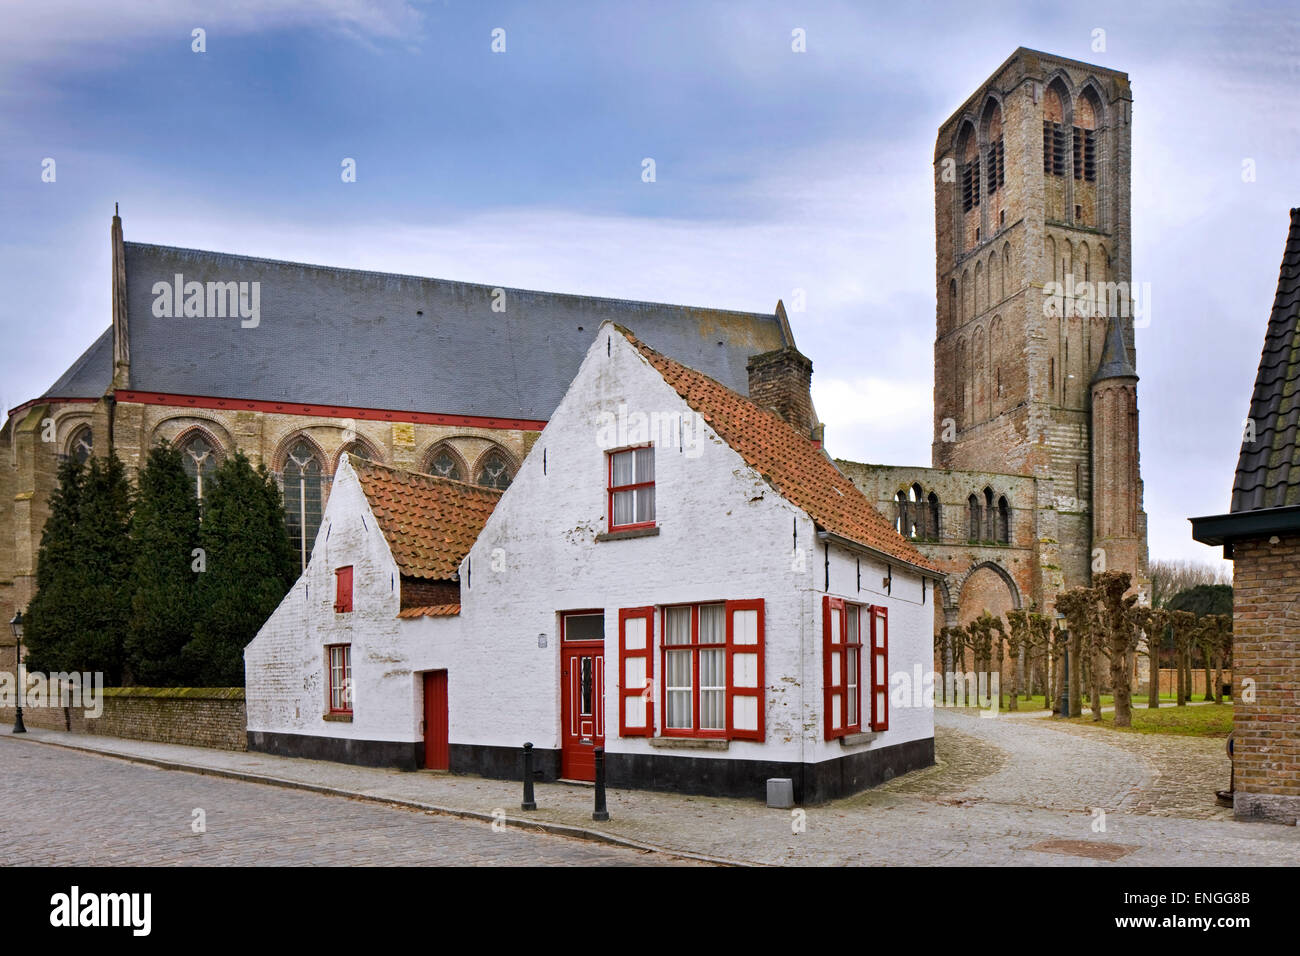 Old white house and the Church of Our Lady / Onze-Lieve-Vrouwekerk in the little town Damme, West Flanders, Belgium Stock Photo